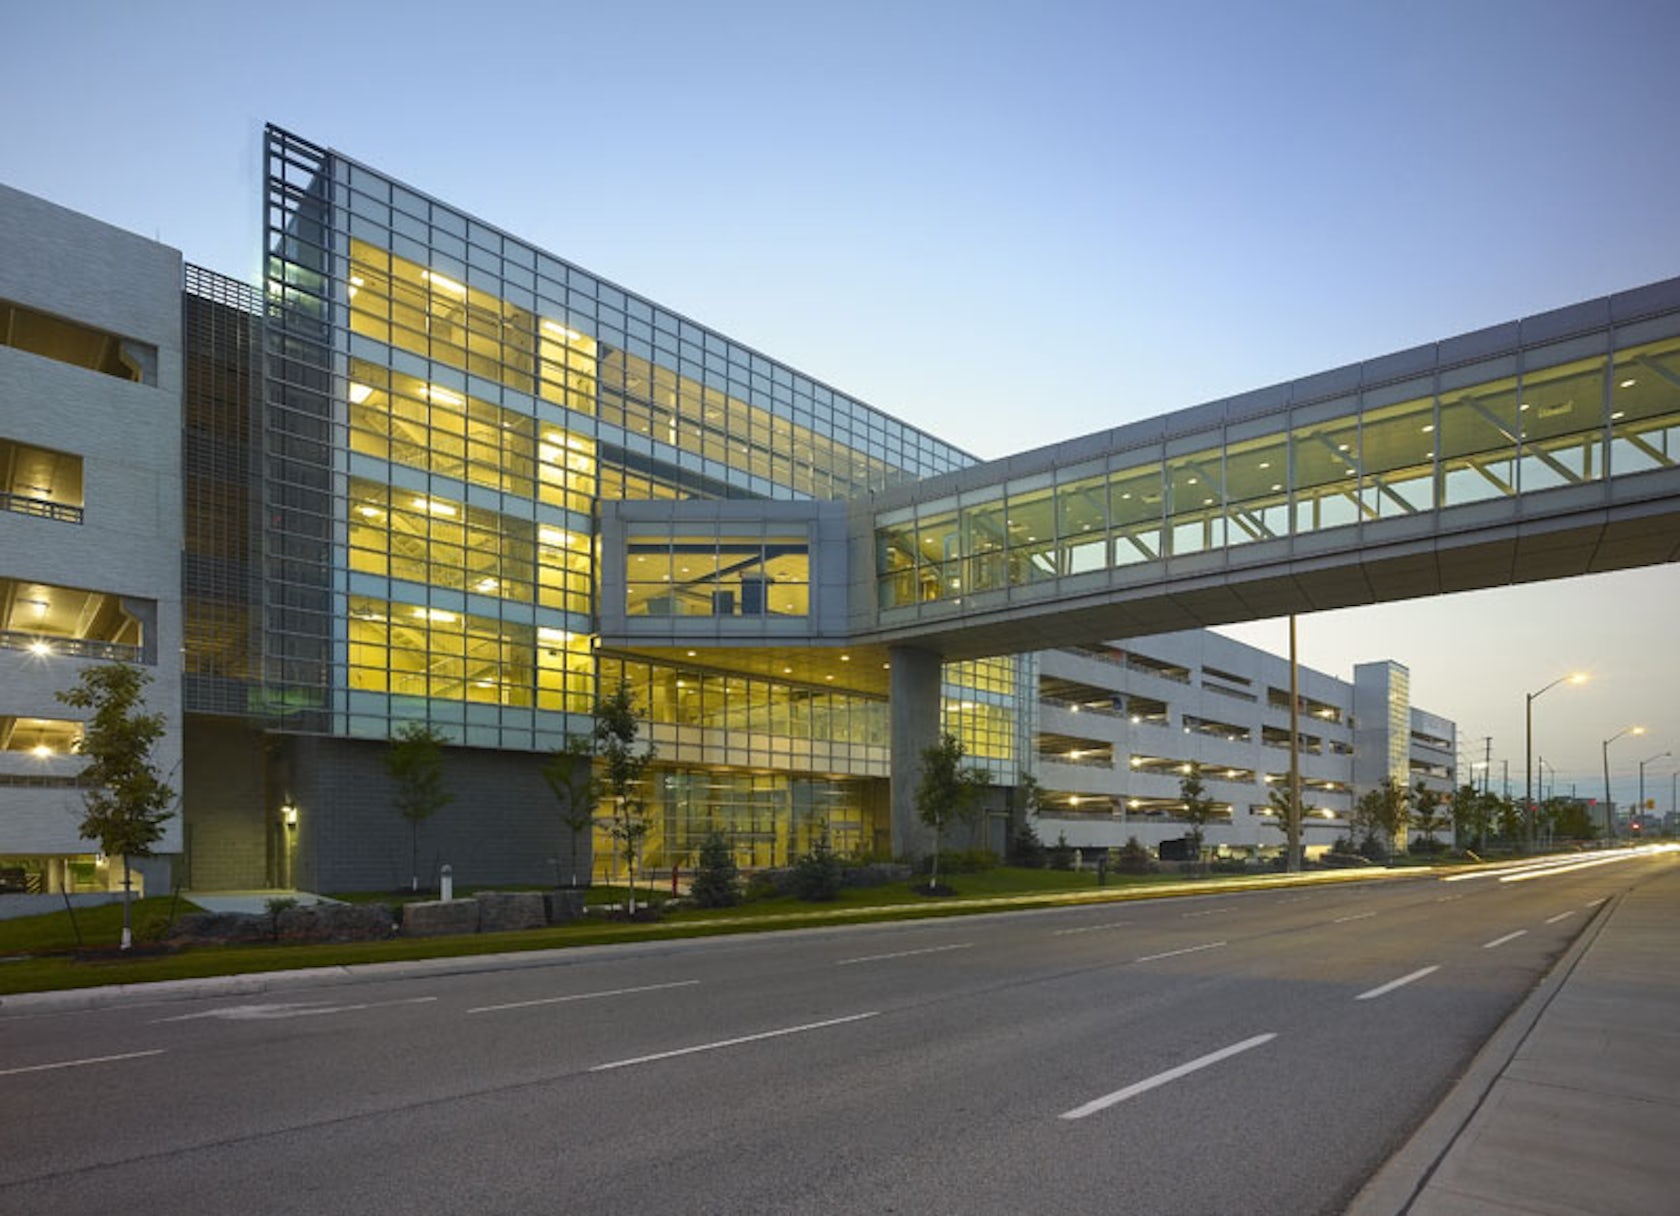 Value Park Garage, Toronto Pearson International Airport by NORR